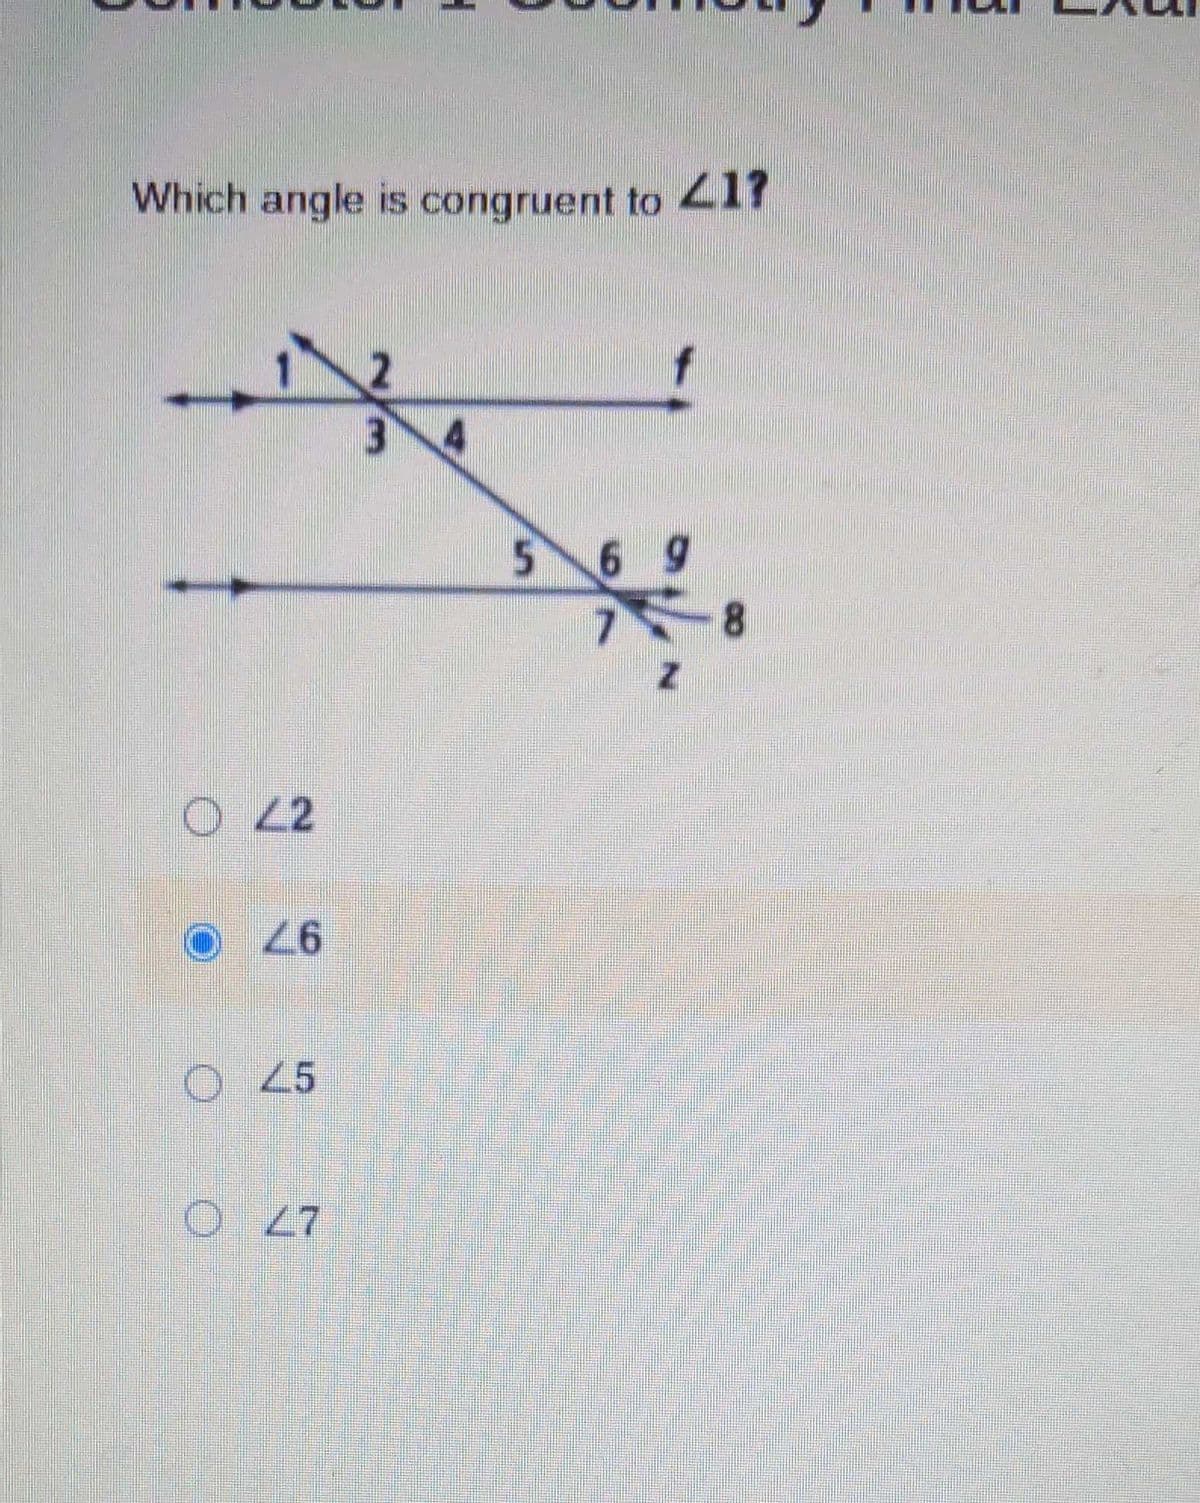 Which angle is congruent to z17
3
4.
56 9
7
8.
O 2
O 45
